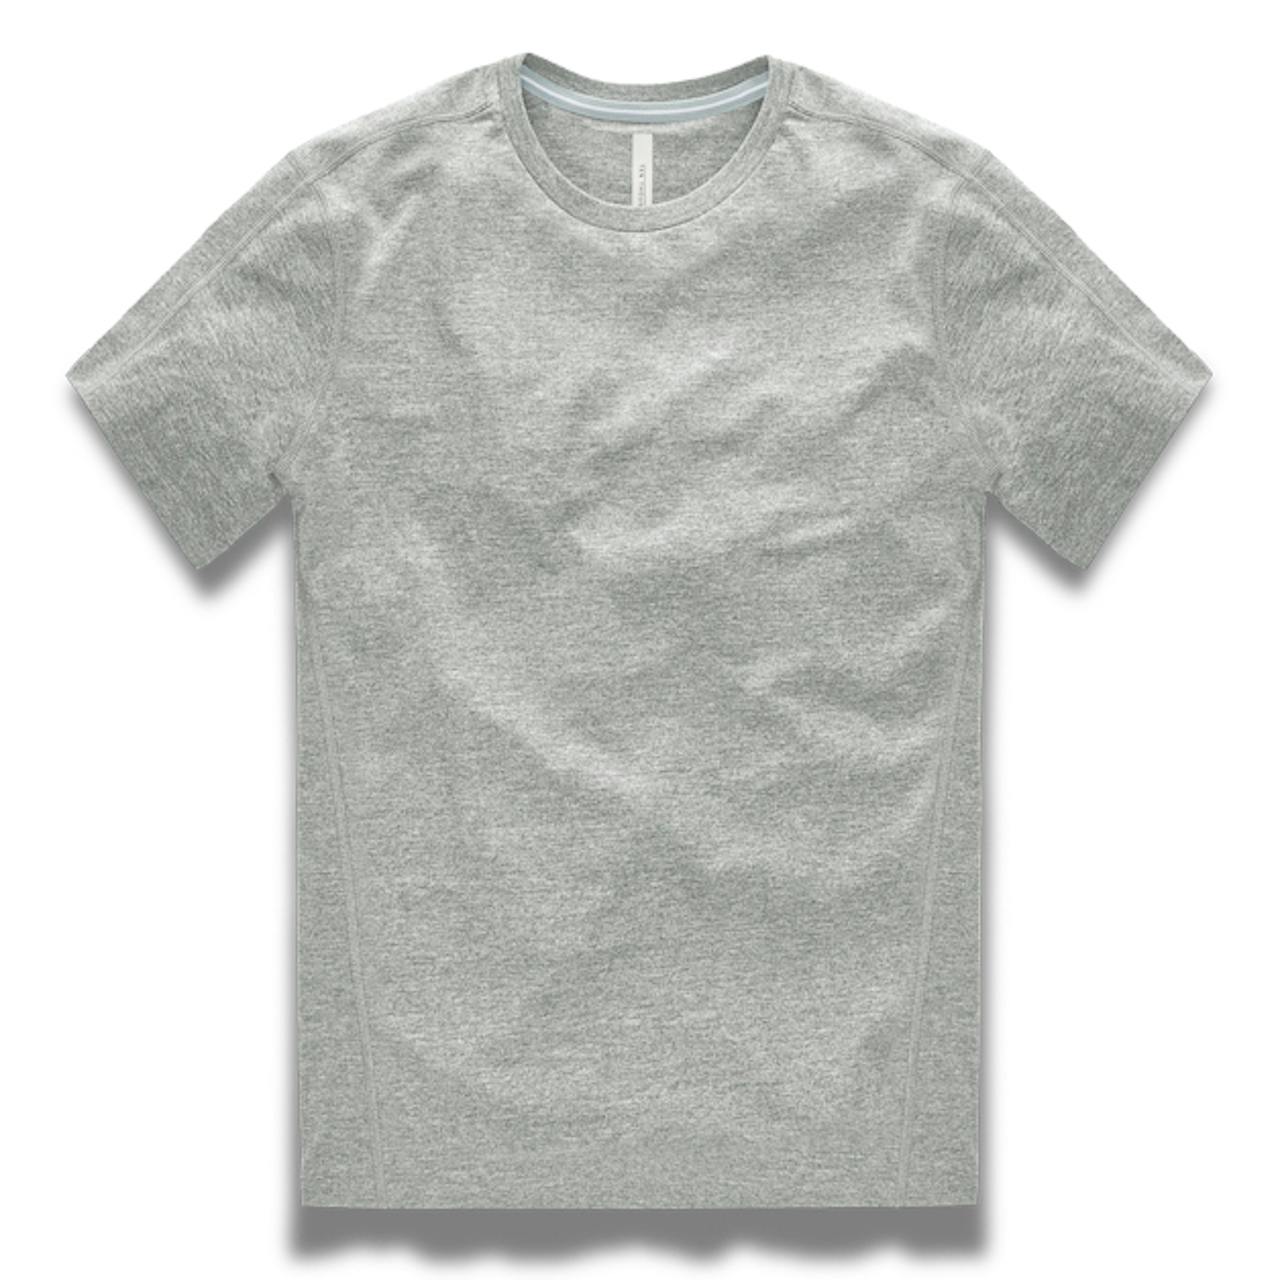 True Cost Series  Why Does a Sustainable T-Shirt Cost $36? — Sustainably  Chic